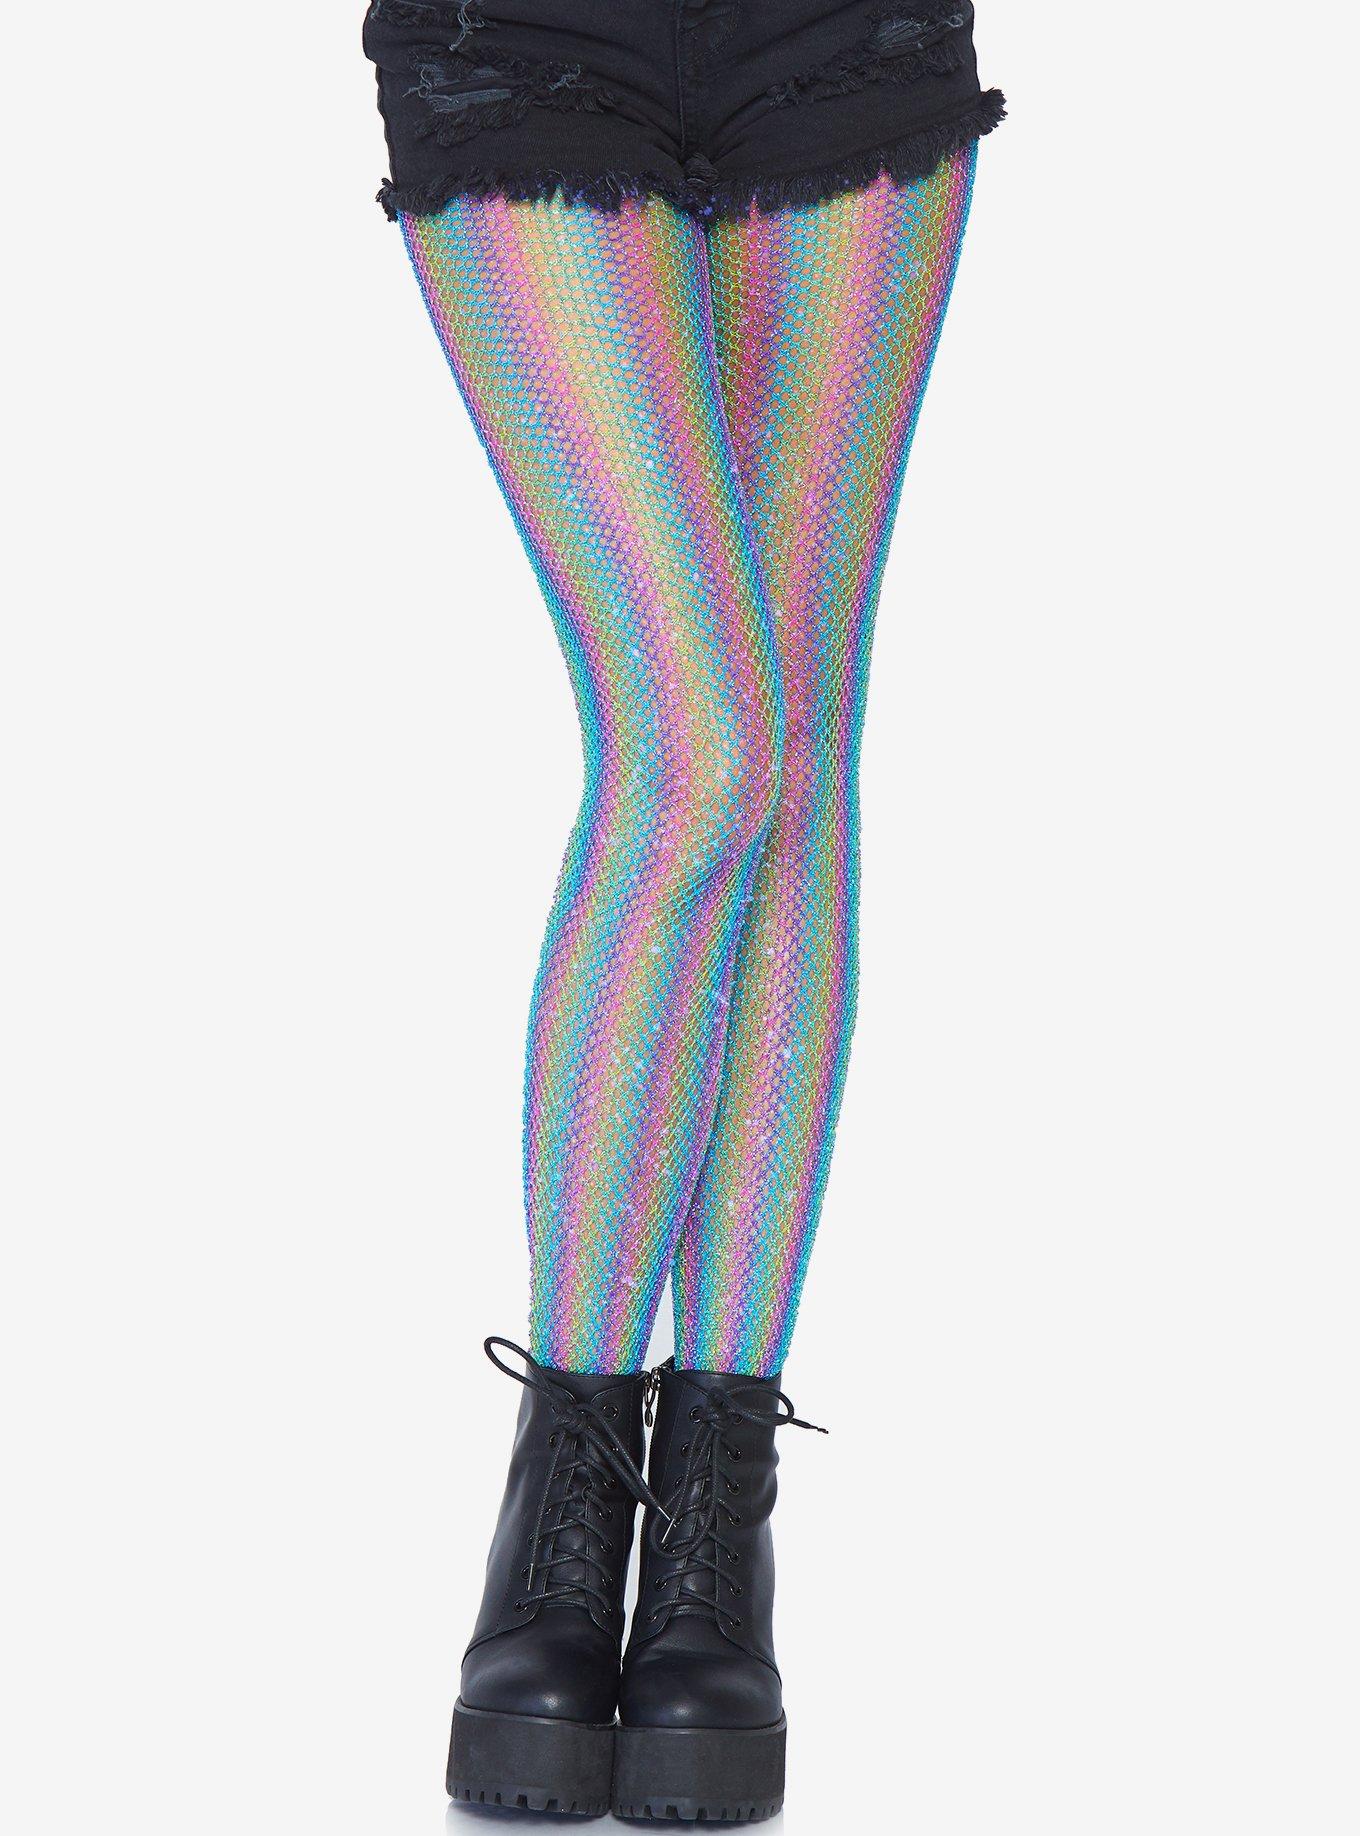 HOT TOPIC COLORFUL RAINBOW FISHNET TIGHTS HARD TO FIND ONE SIZE